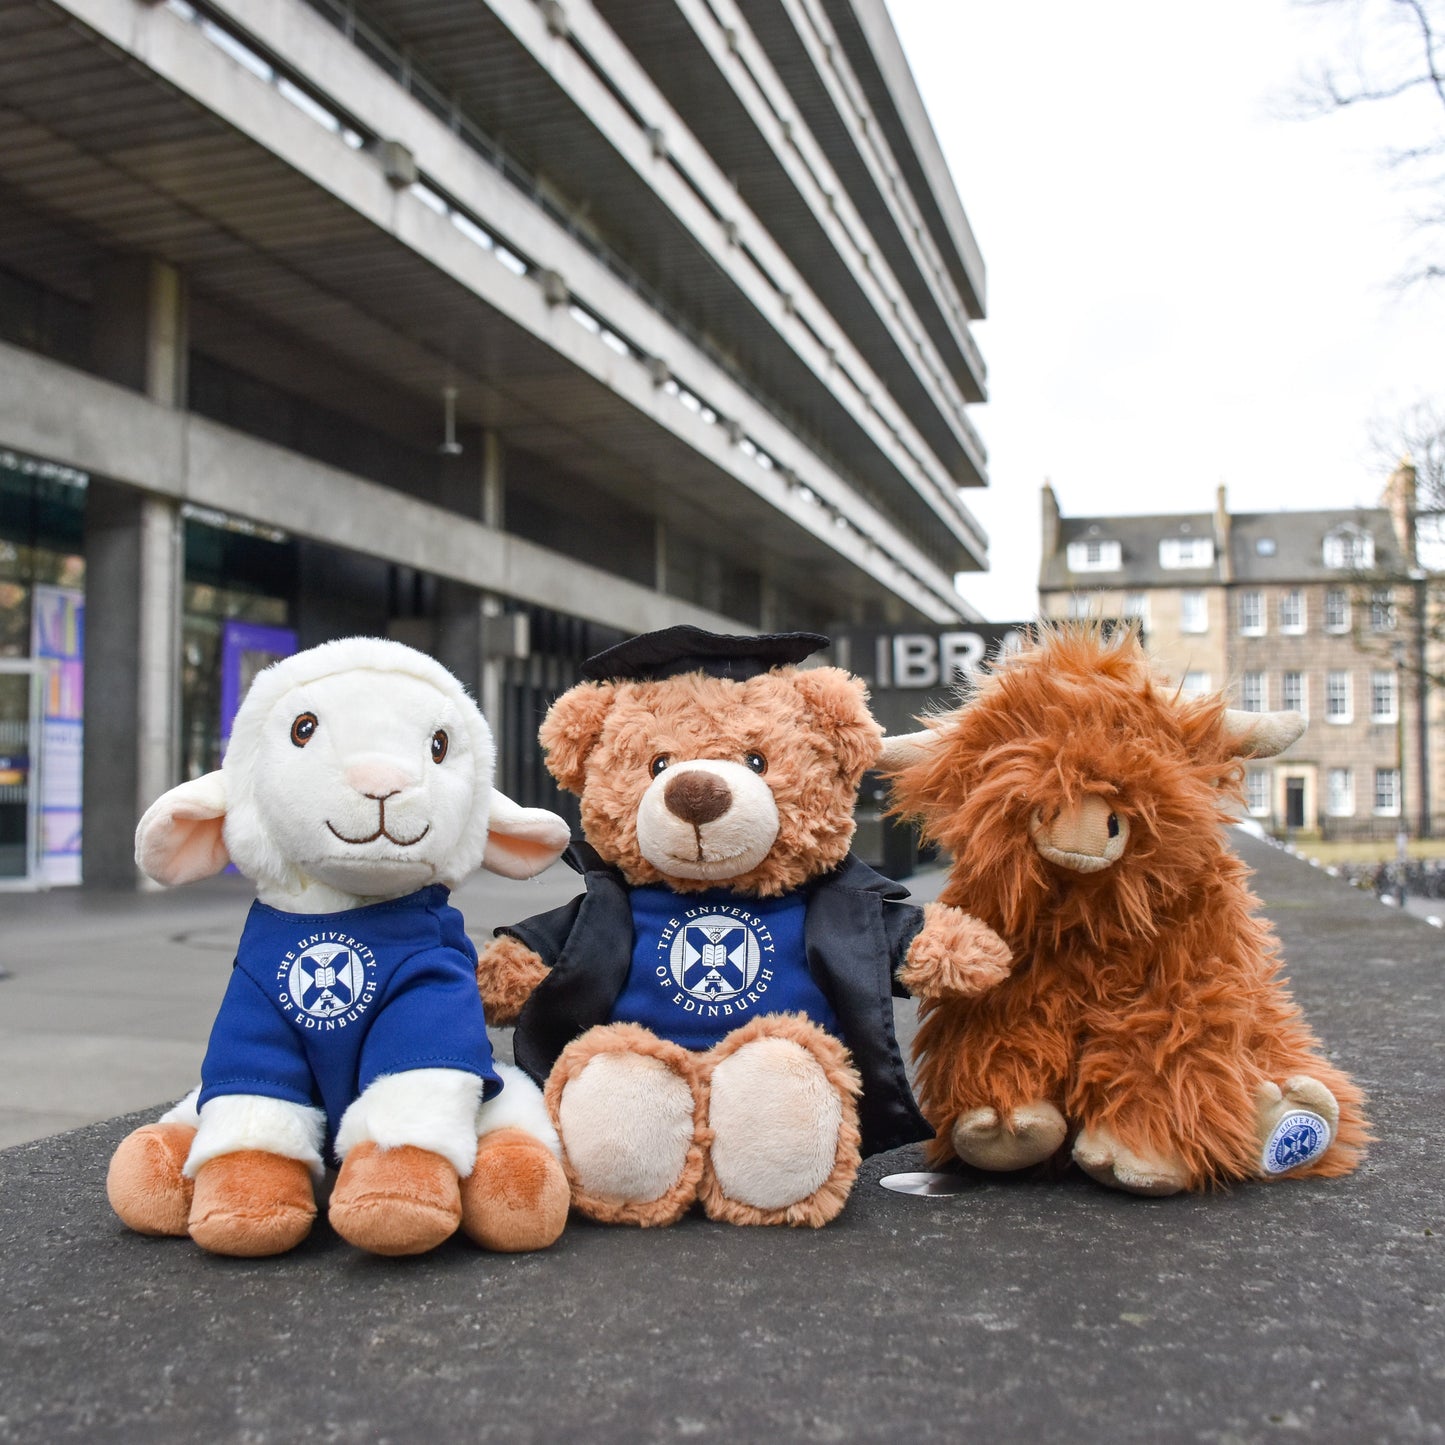 From left to right: Dolly Recycled Plush, Edinbear Recycled Plush, and McCoowan Recycled plush sitting in front of the Main Library.